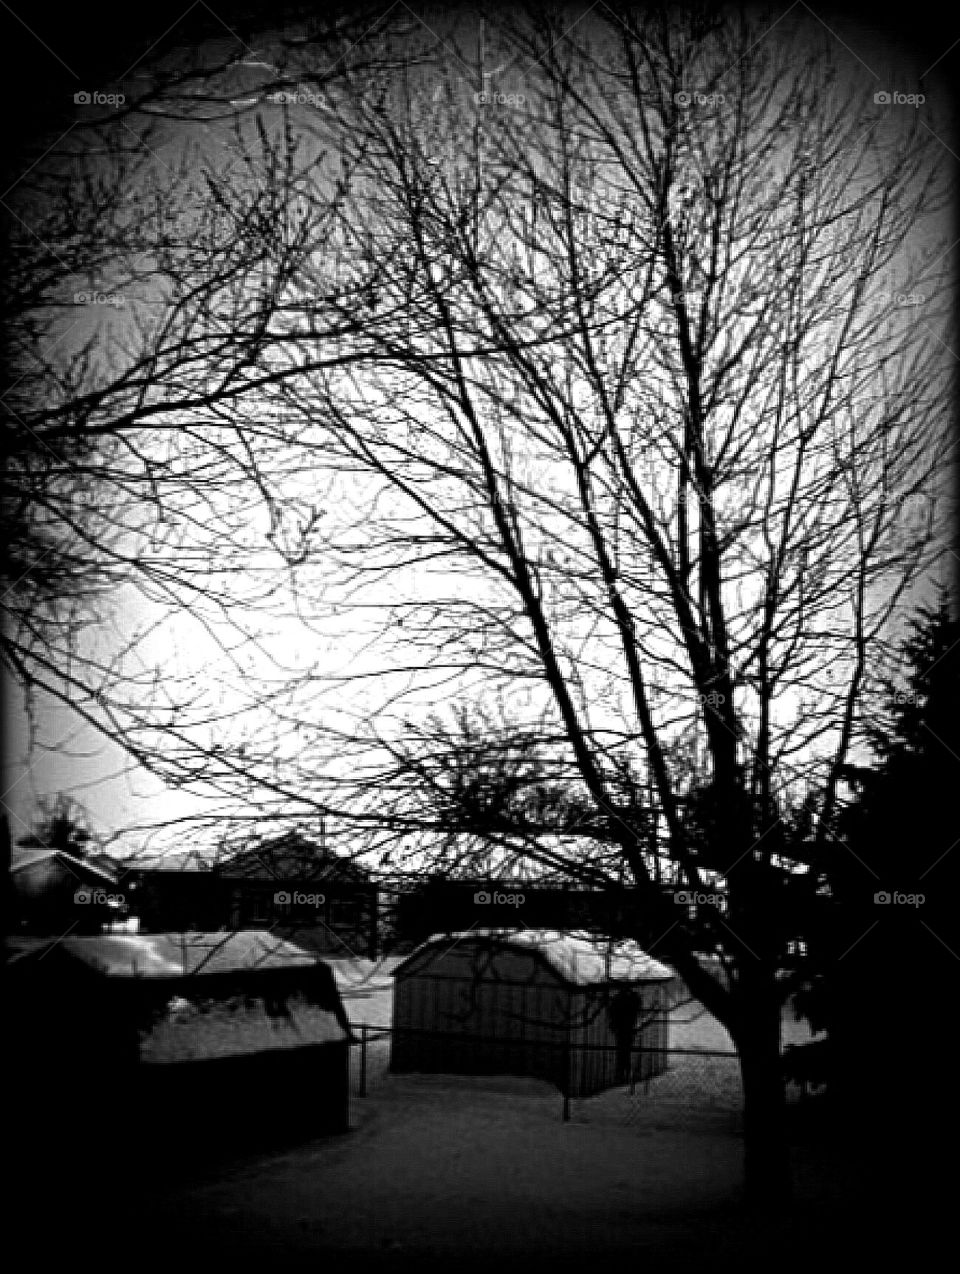 At backyard during winter 
(Create on my own pic)